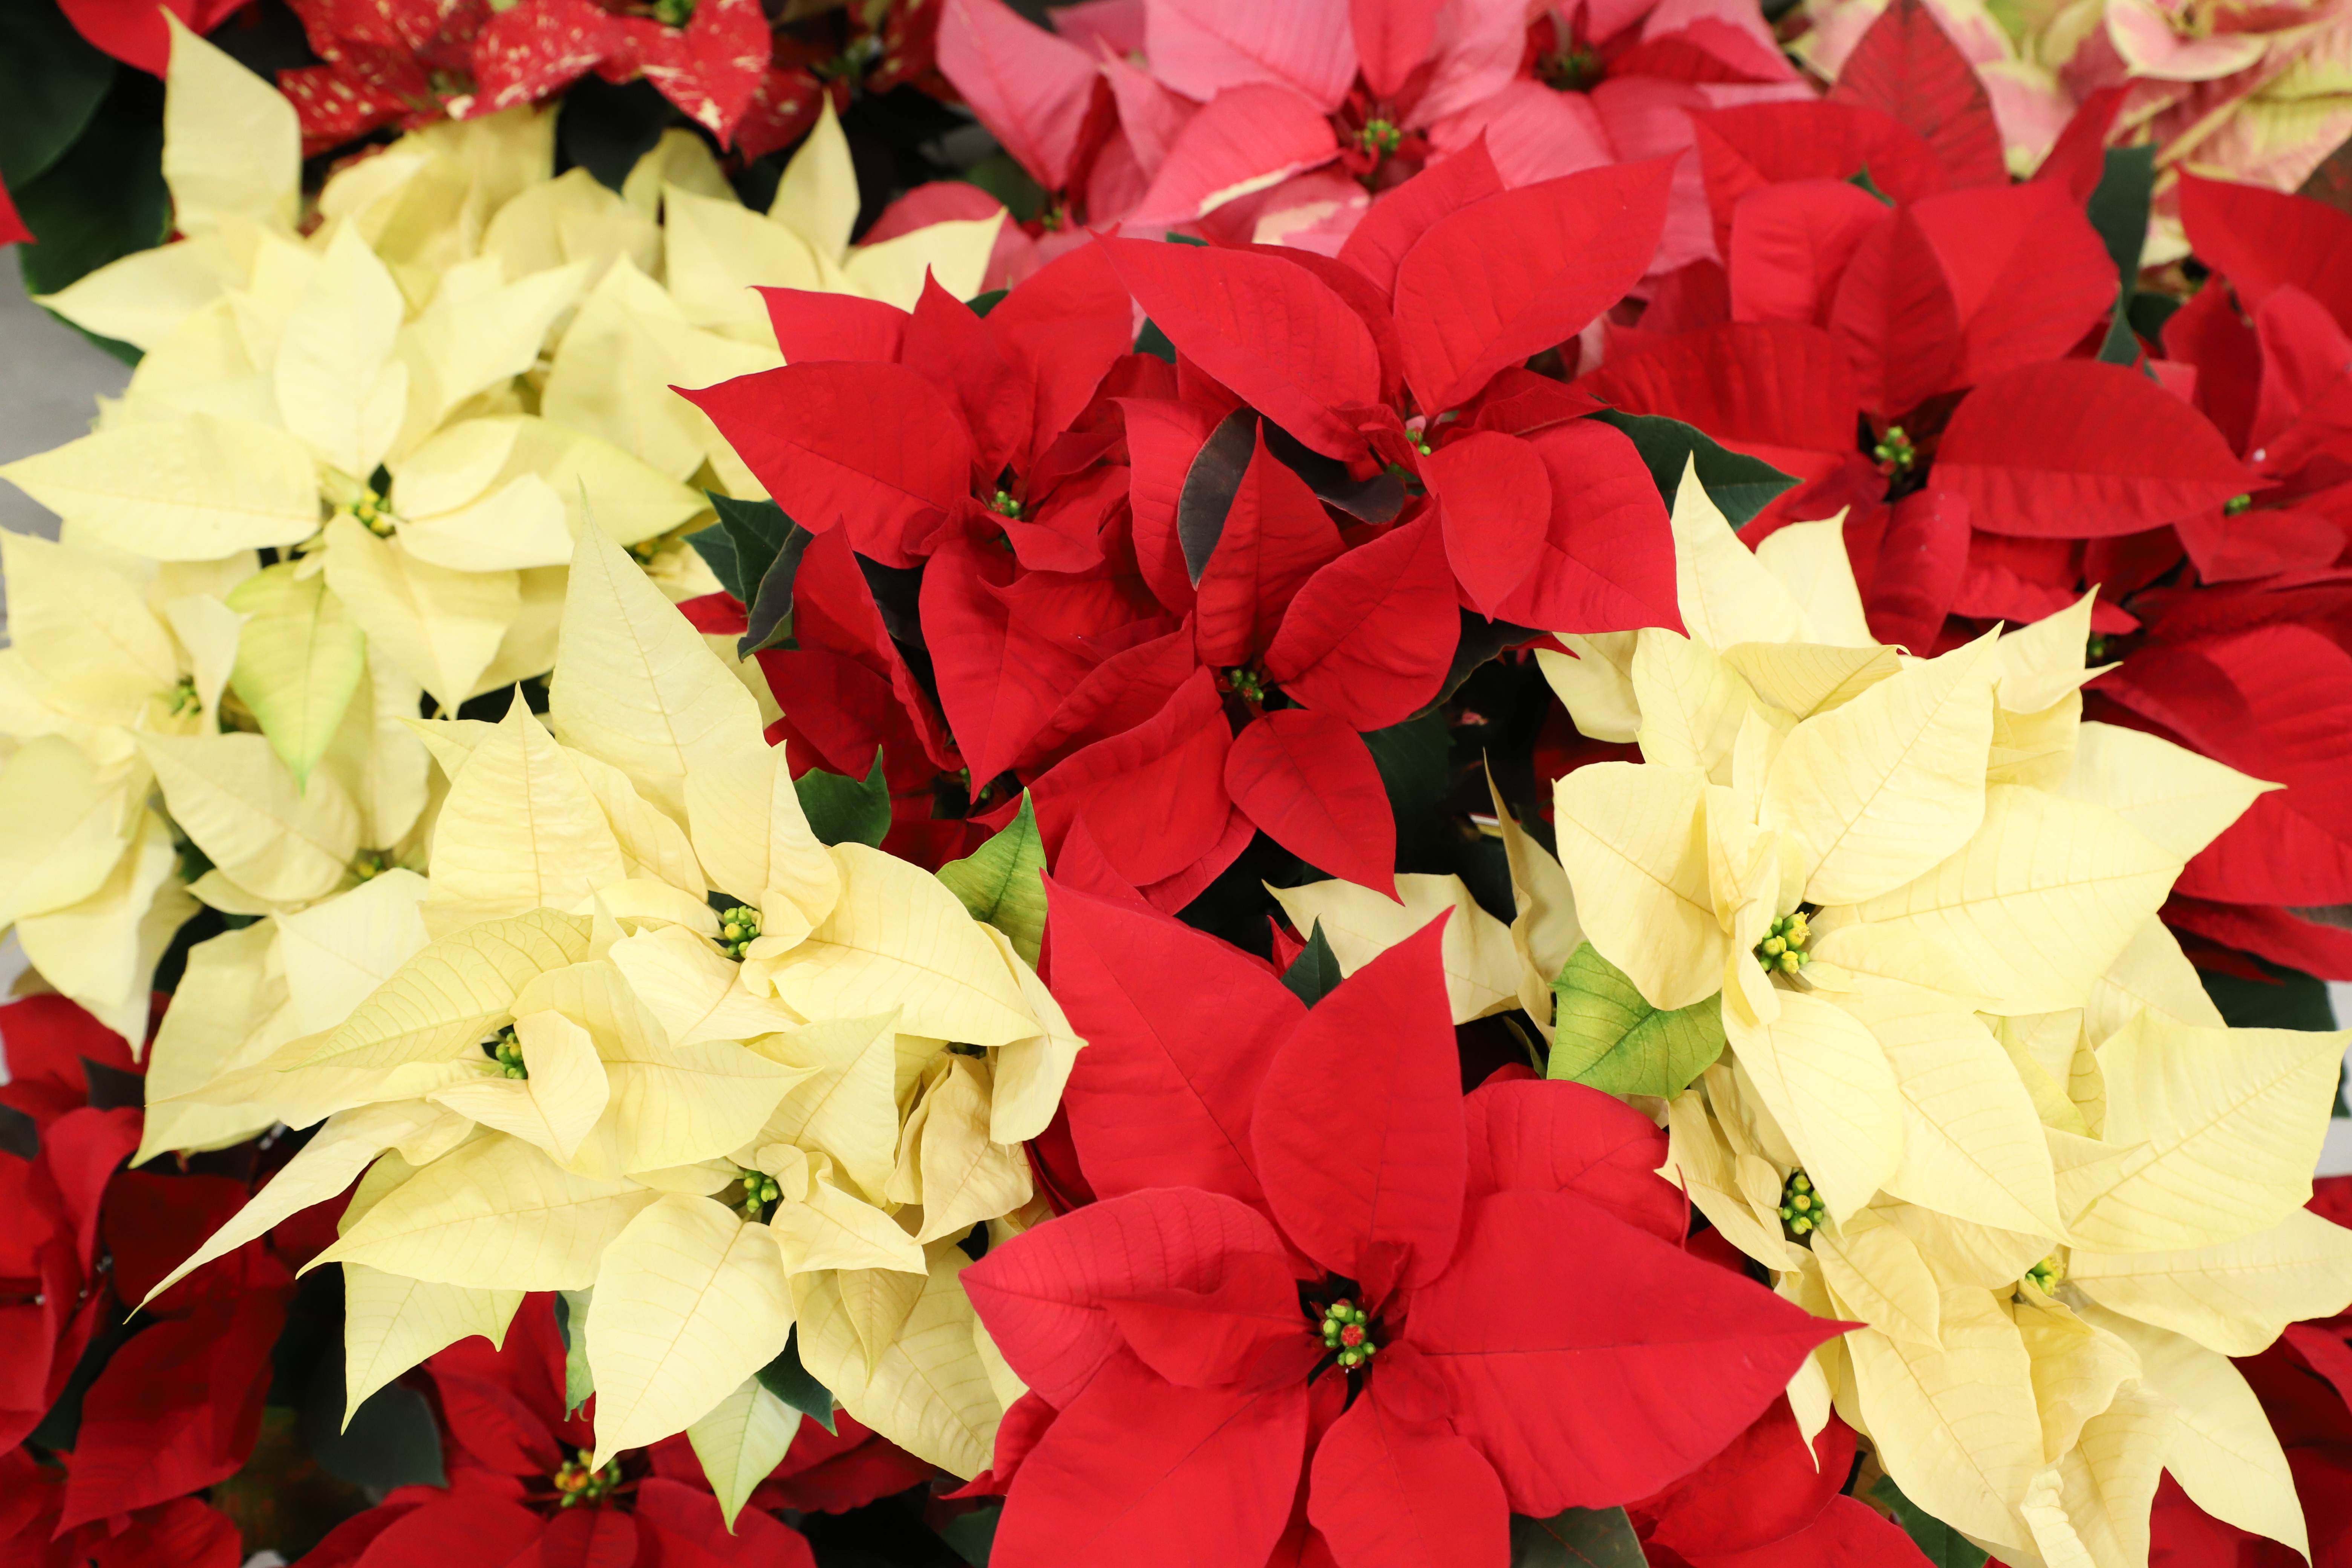 Poinsettias are grown and cared for by Horticulture Club members in greenhouses during the fall semester on the University of Nebraska–Lincoln East Campus.